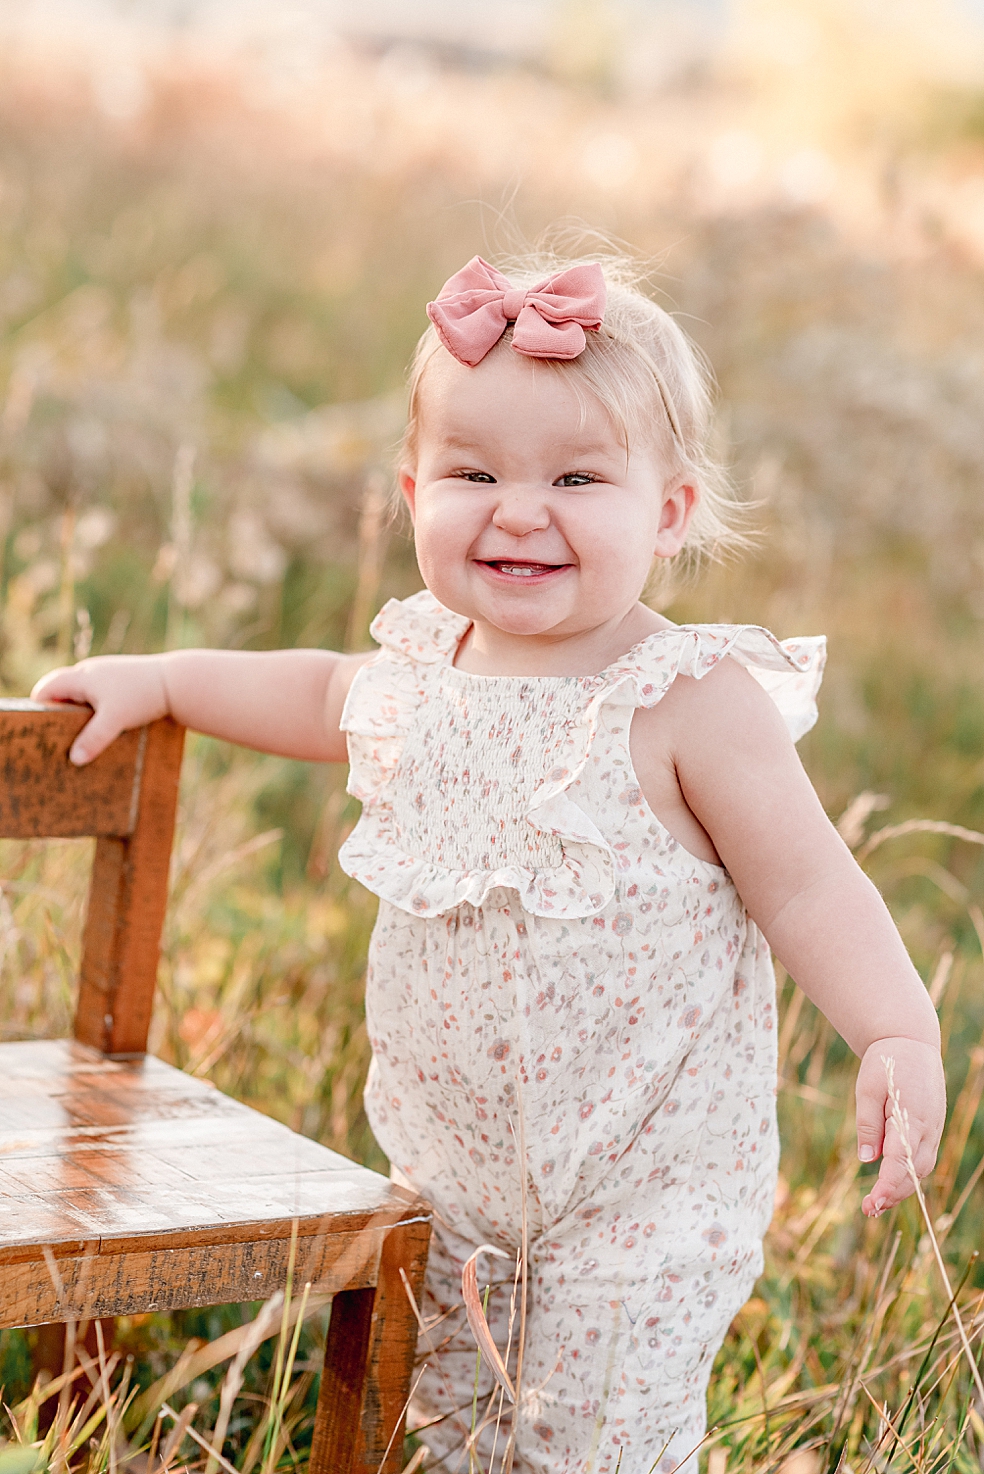 Toddler girl in pink bow smiling at the camera | Photo by Jessica Lee Photography